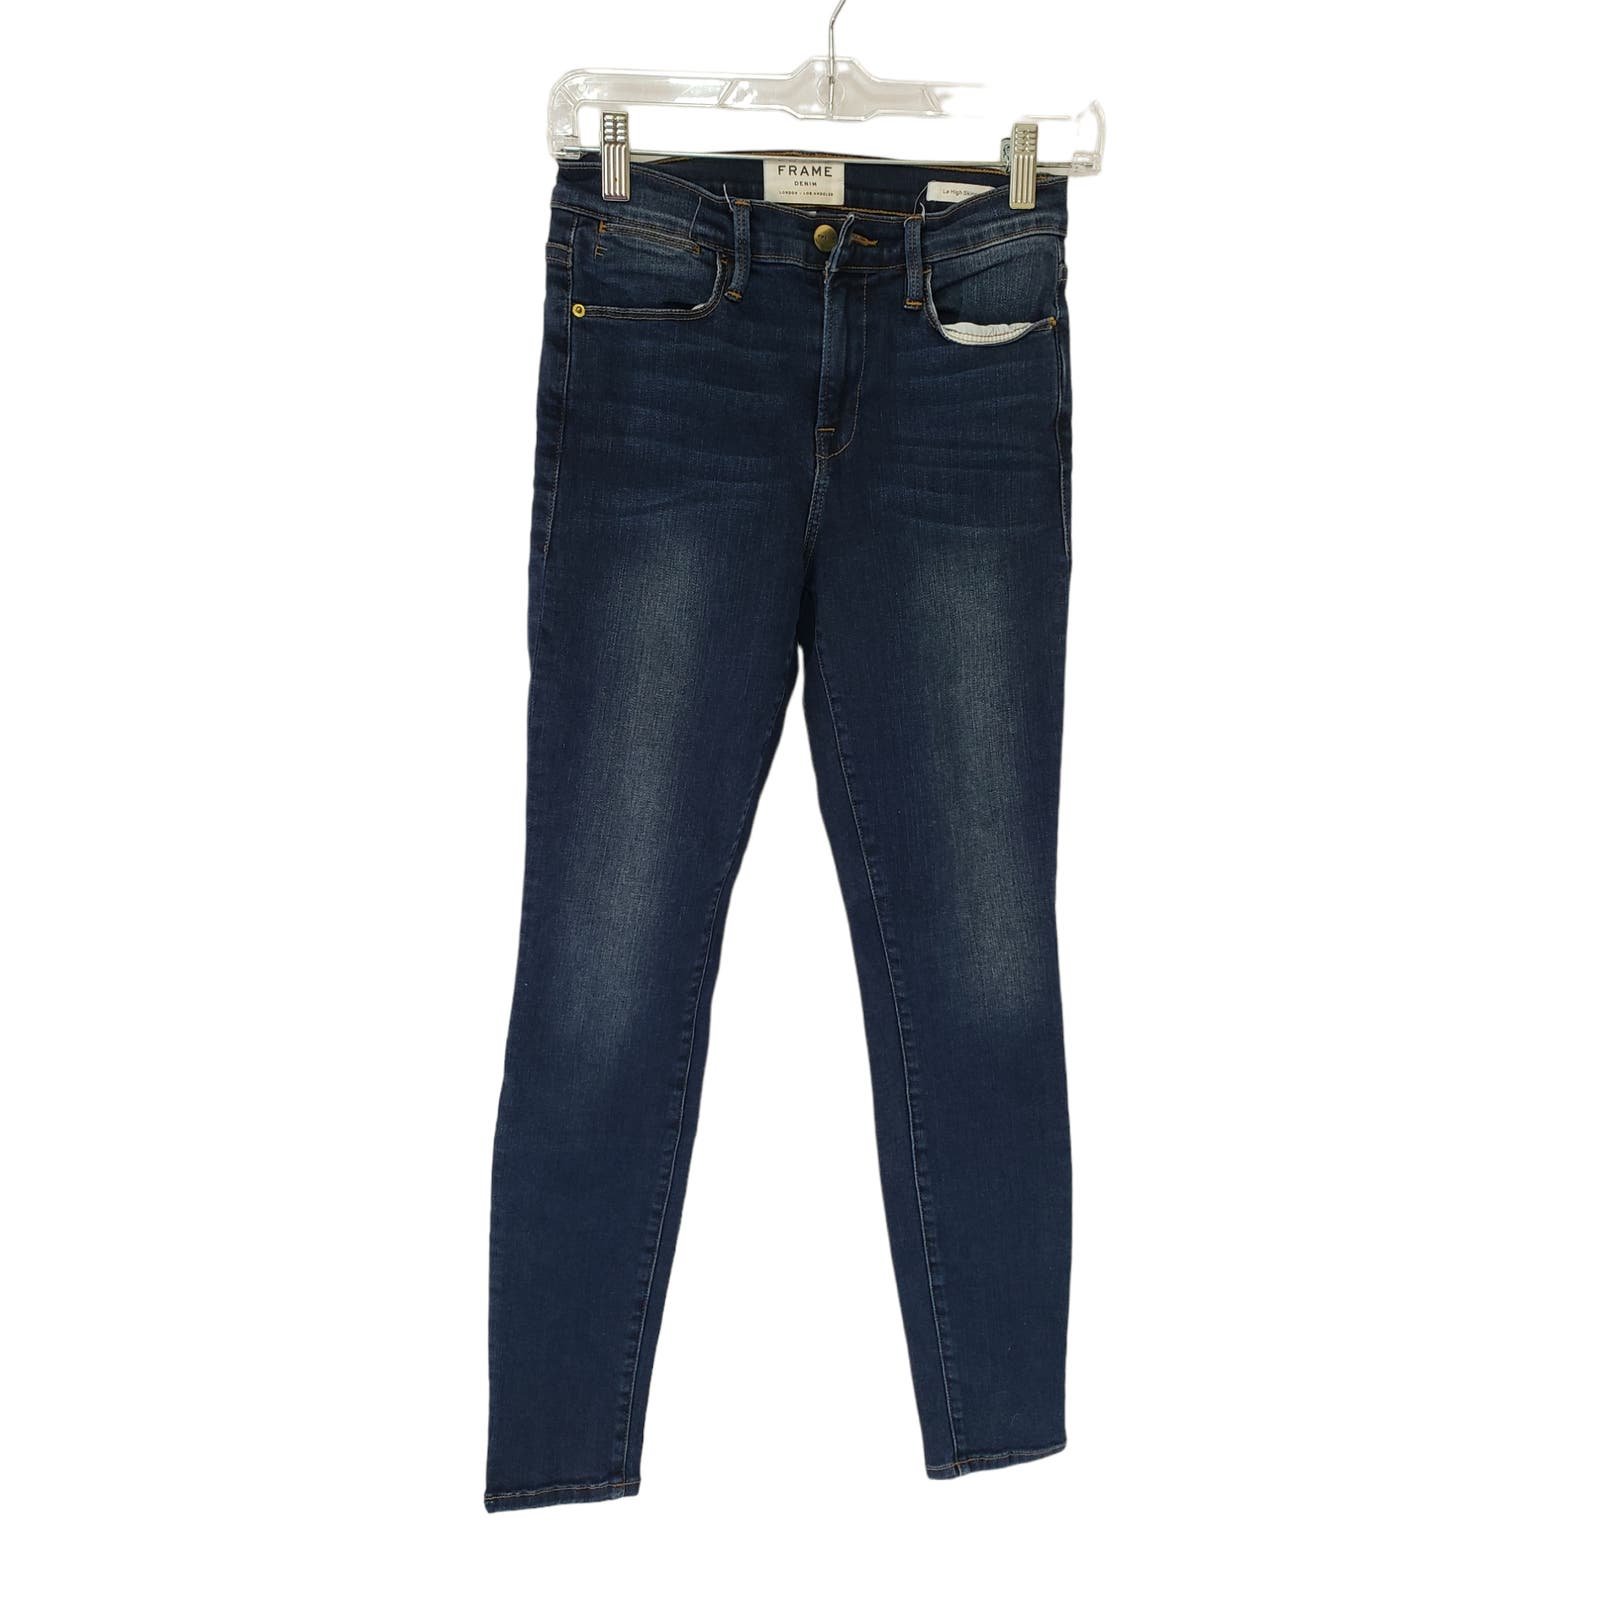 the Lowest price FRAME Le High Skinny Denim Blue Jeans 